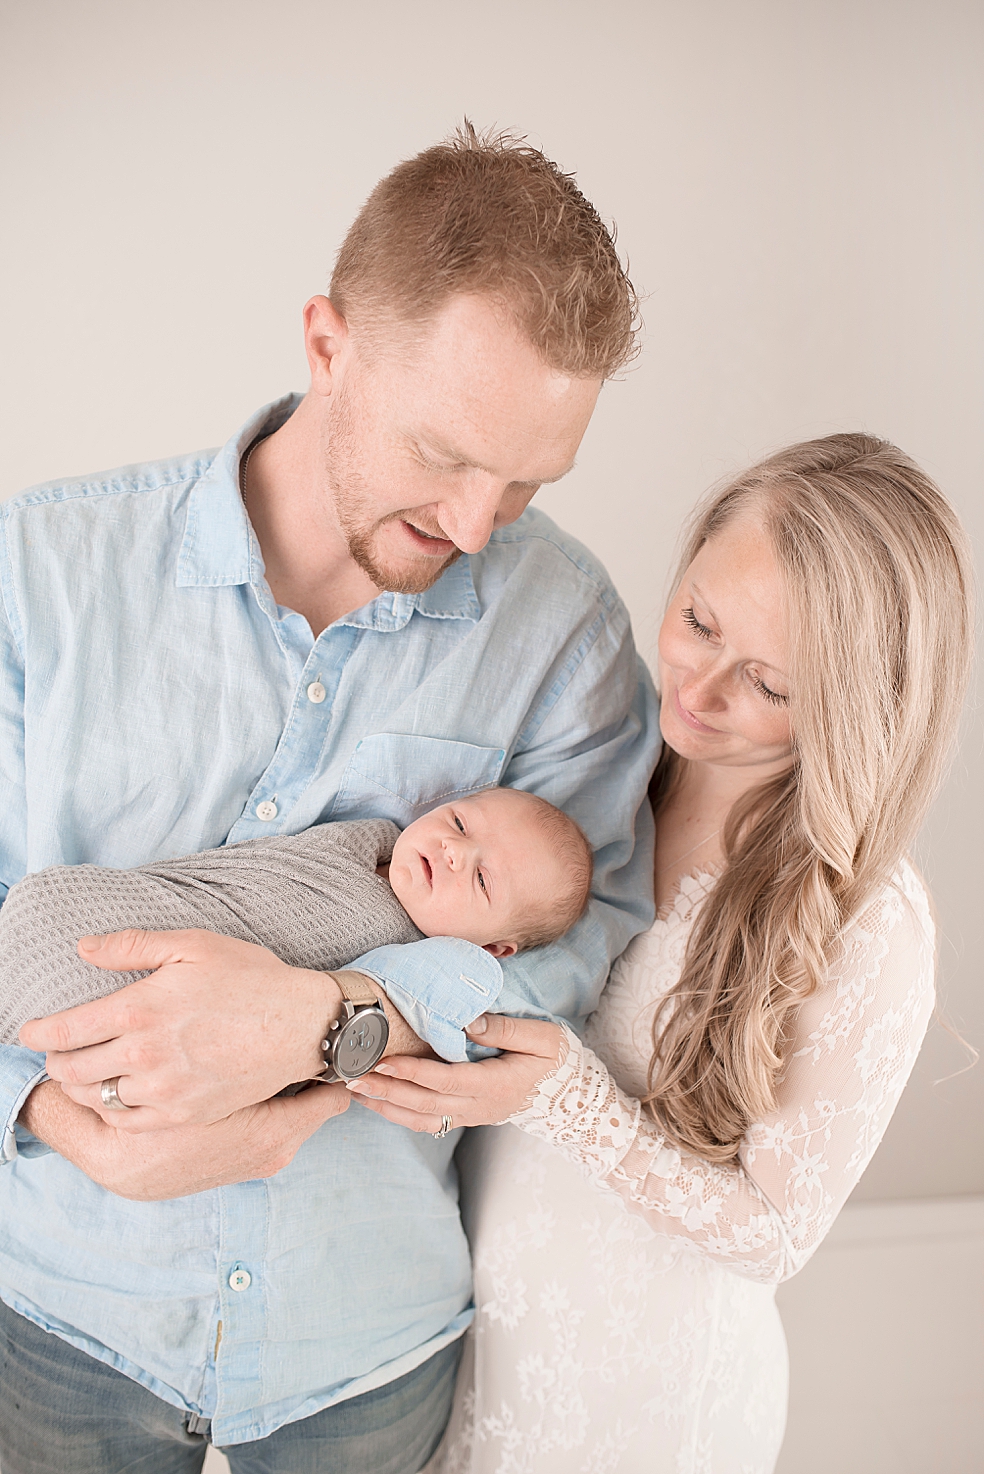 Mom and dad holding newborn baby boy | Photo by Jessica Lee Photography